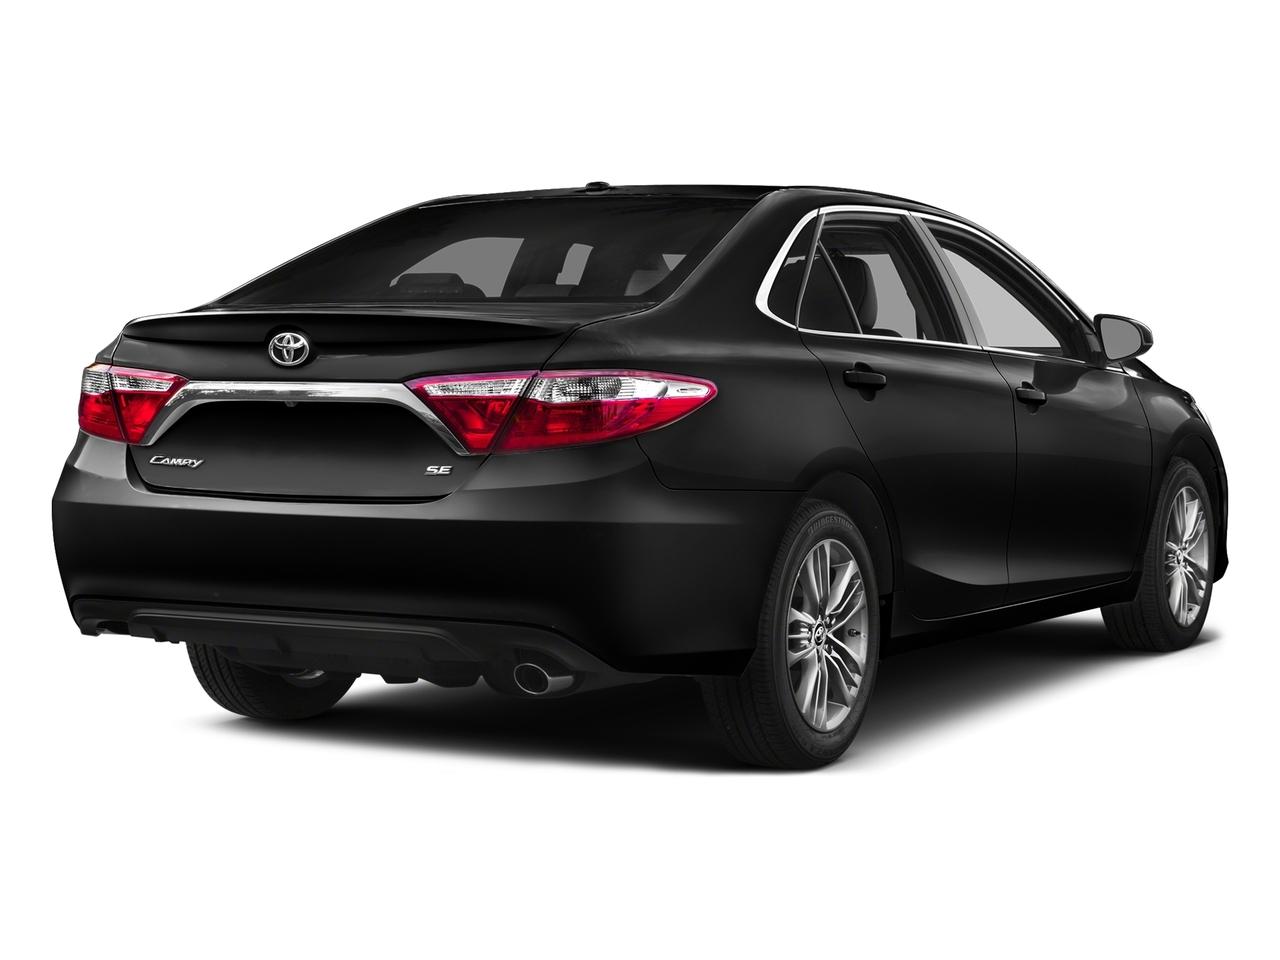 Used 2017 Toyota Camry SE Auto (SE) in Midnight Black Metallic for sale ...